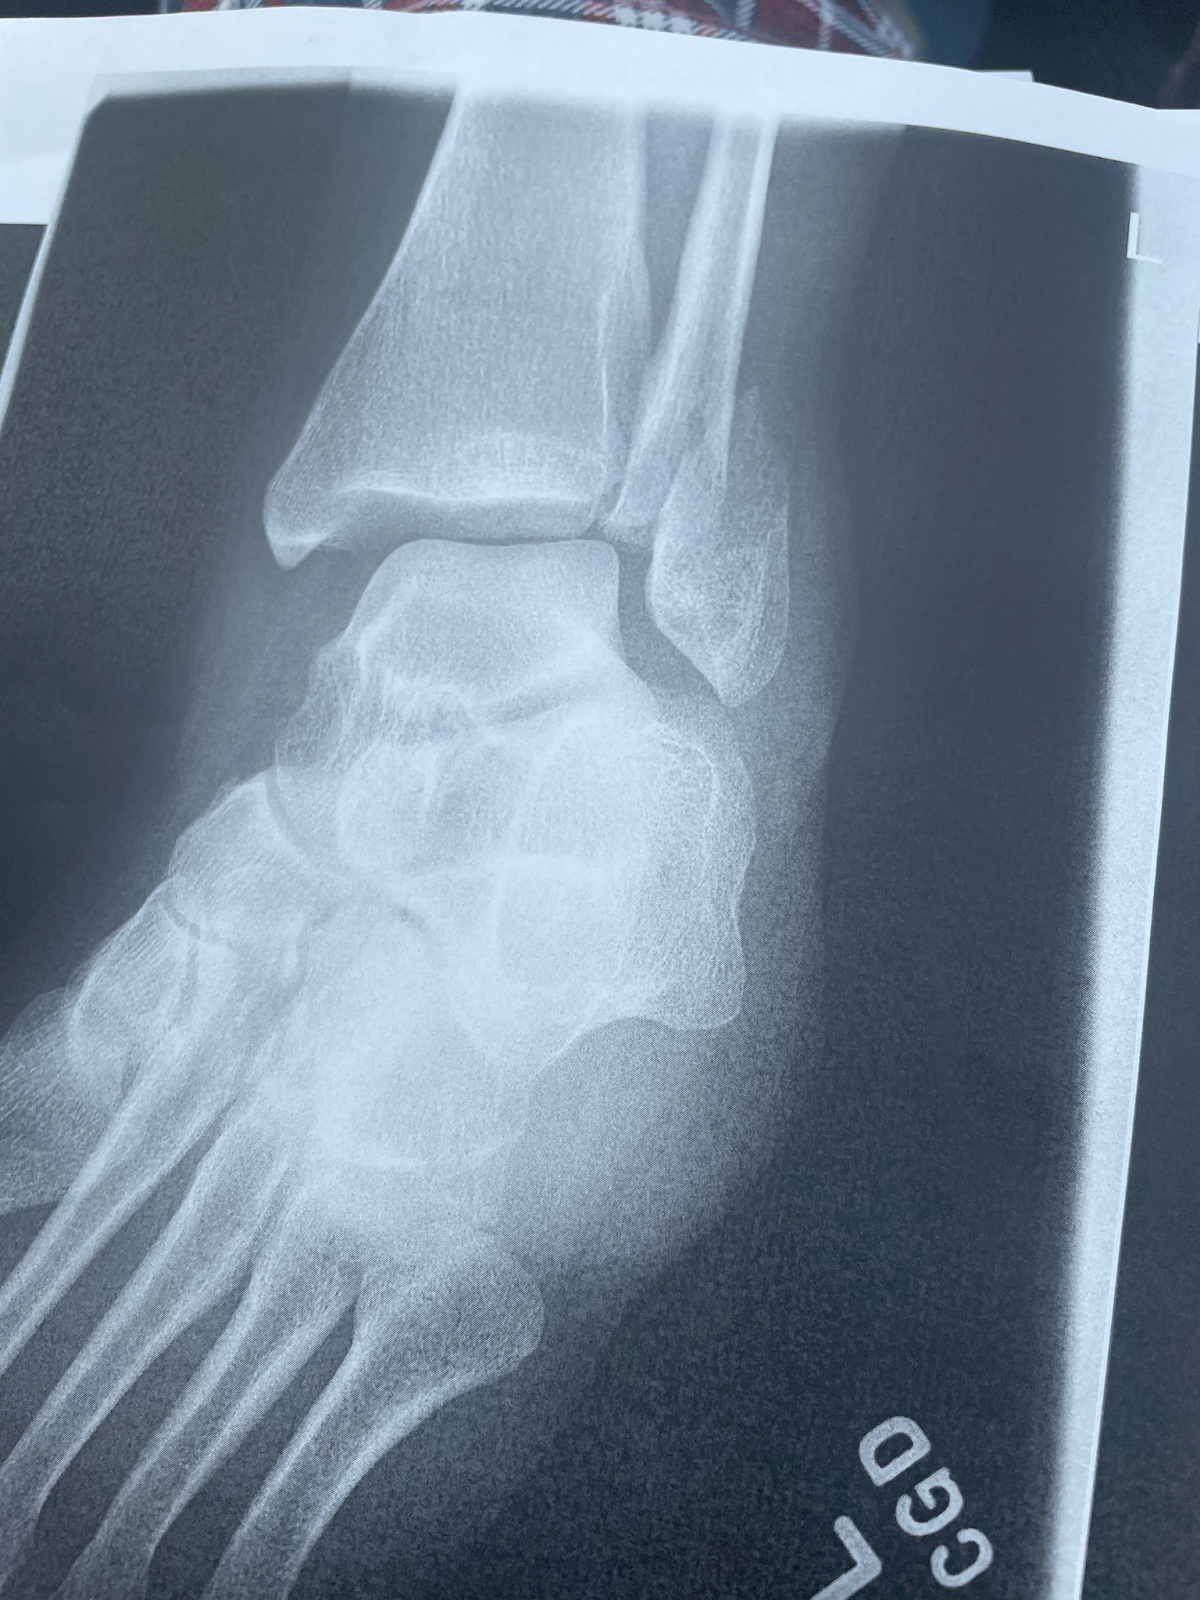 Initial X ray showing left distal fibula fracture